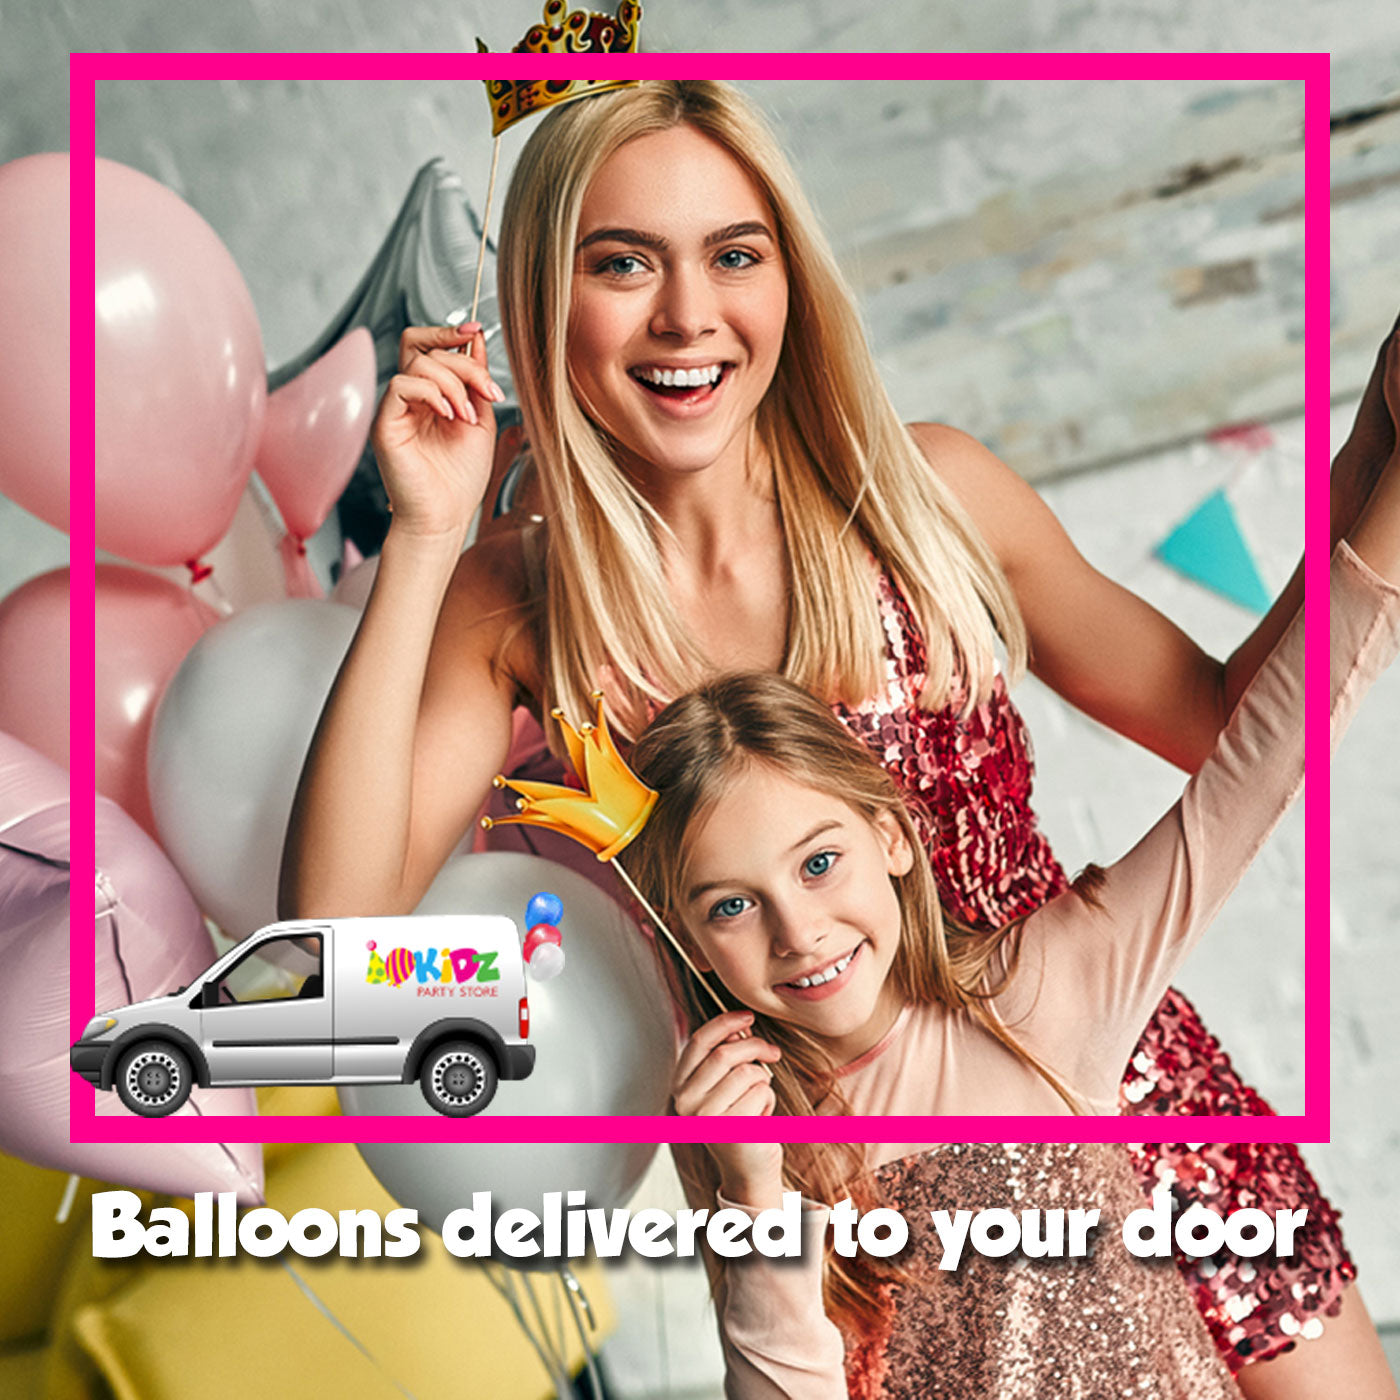 Helium Balloons delivered to your party venue inflated and ready for display!